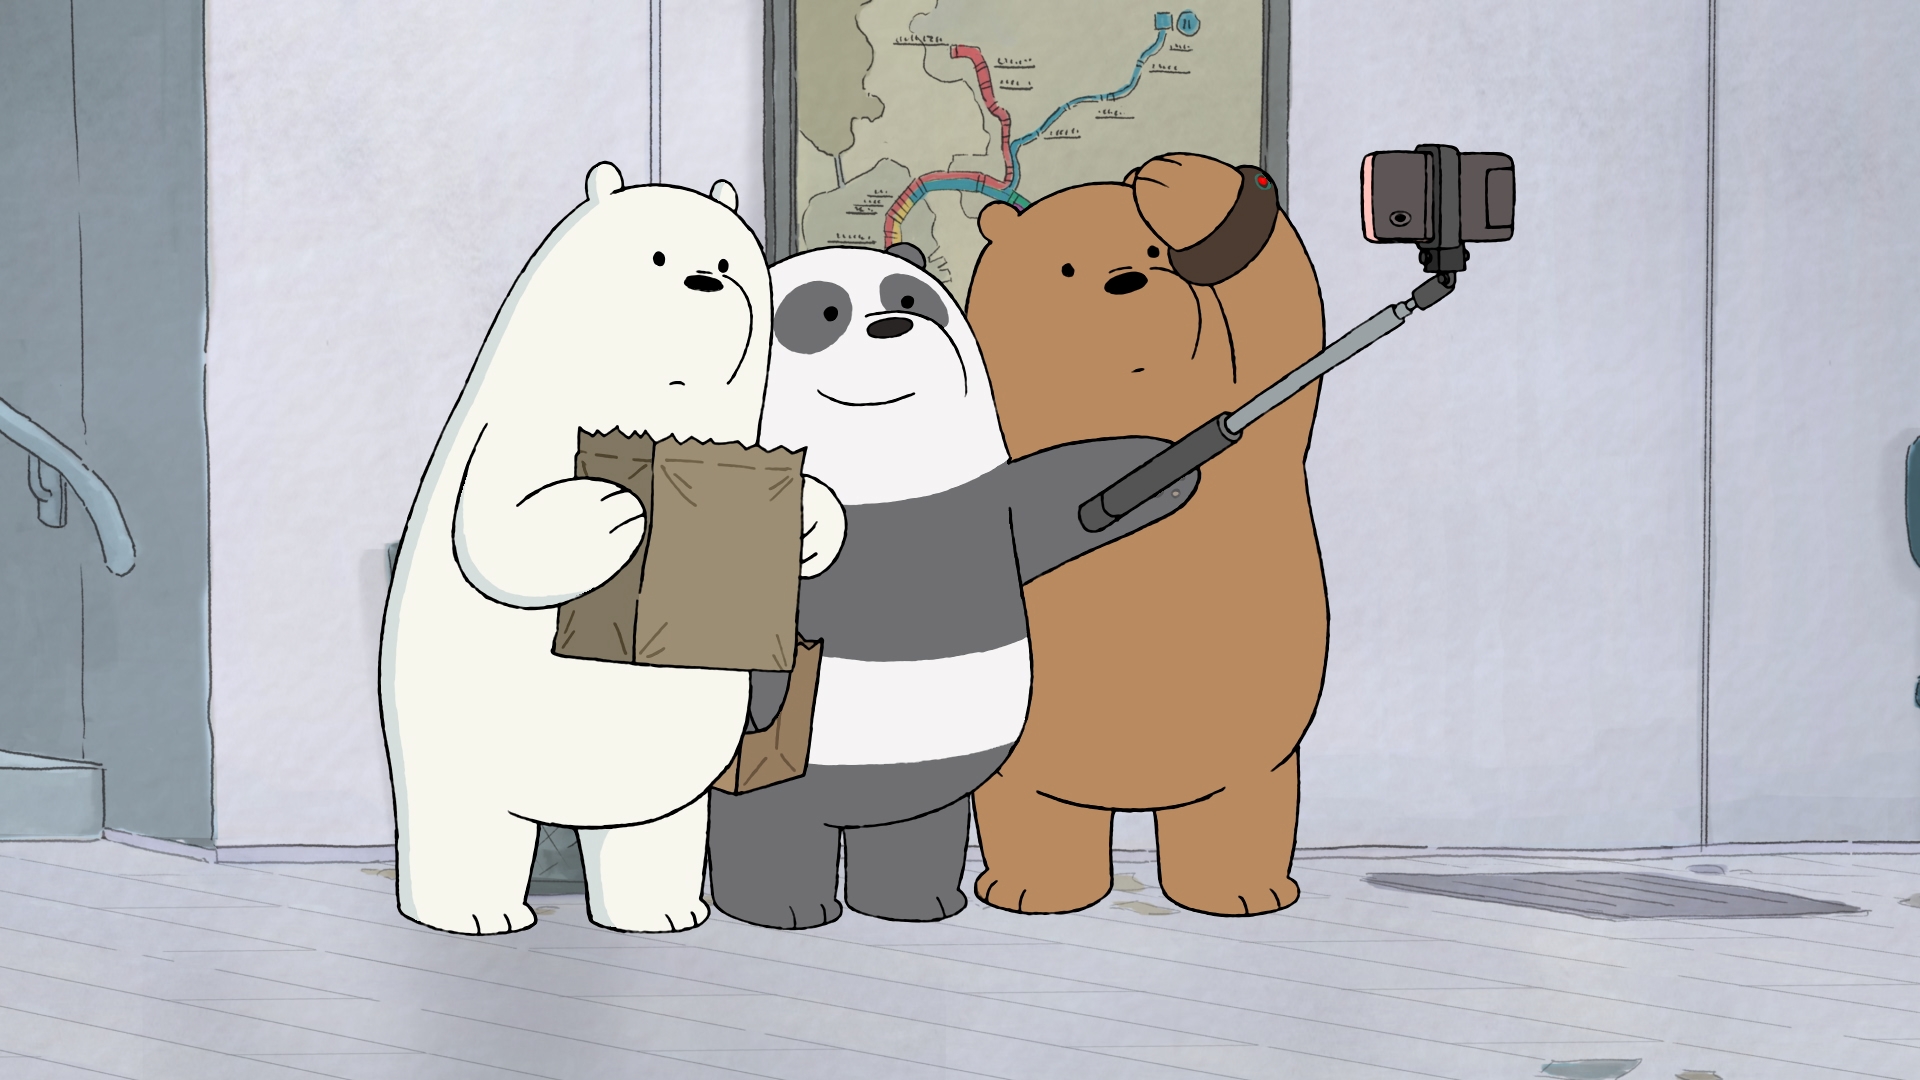 523 Wallpaper Pc We Bare Bears Images Pictures MyWeb